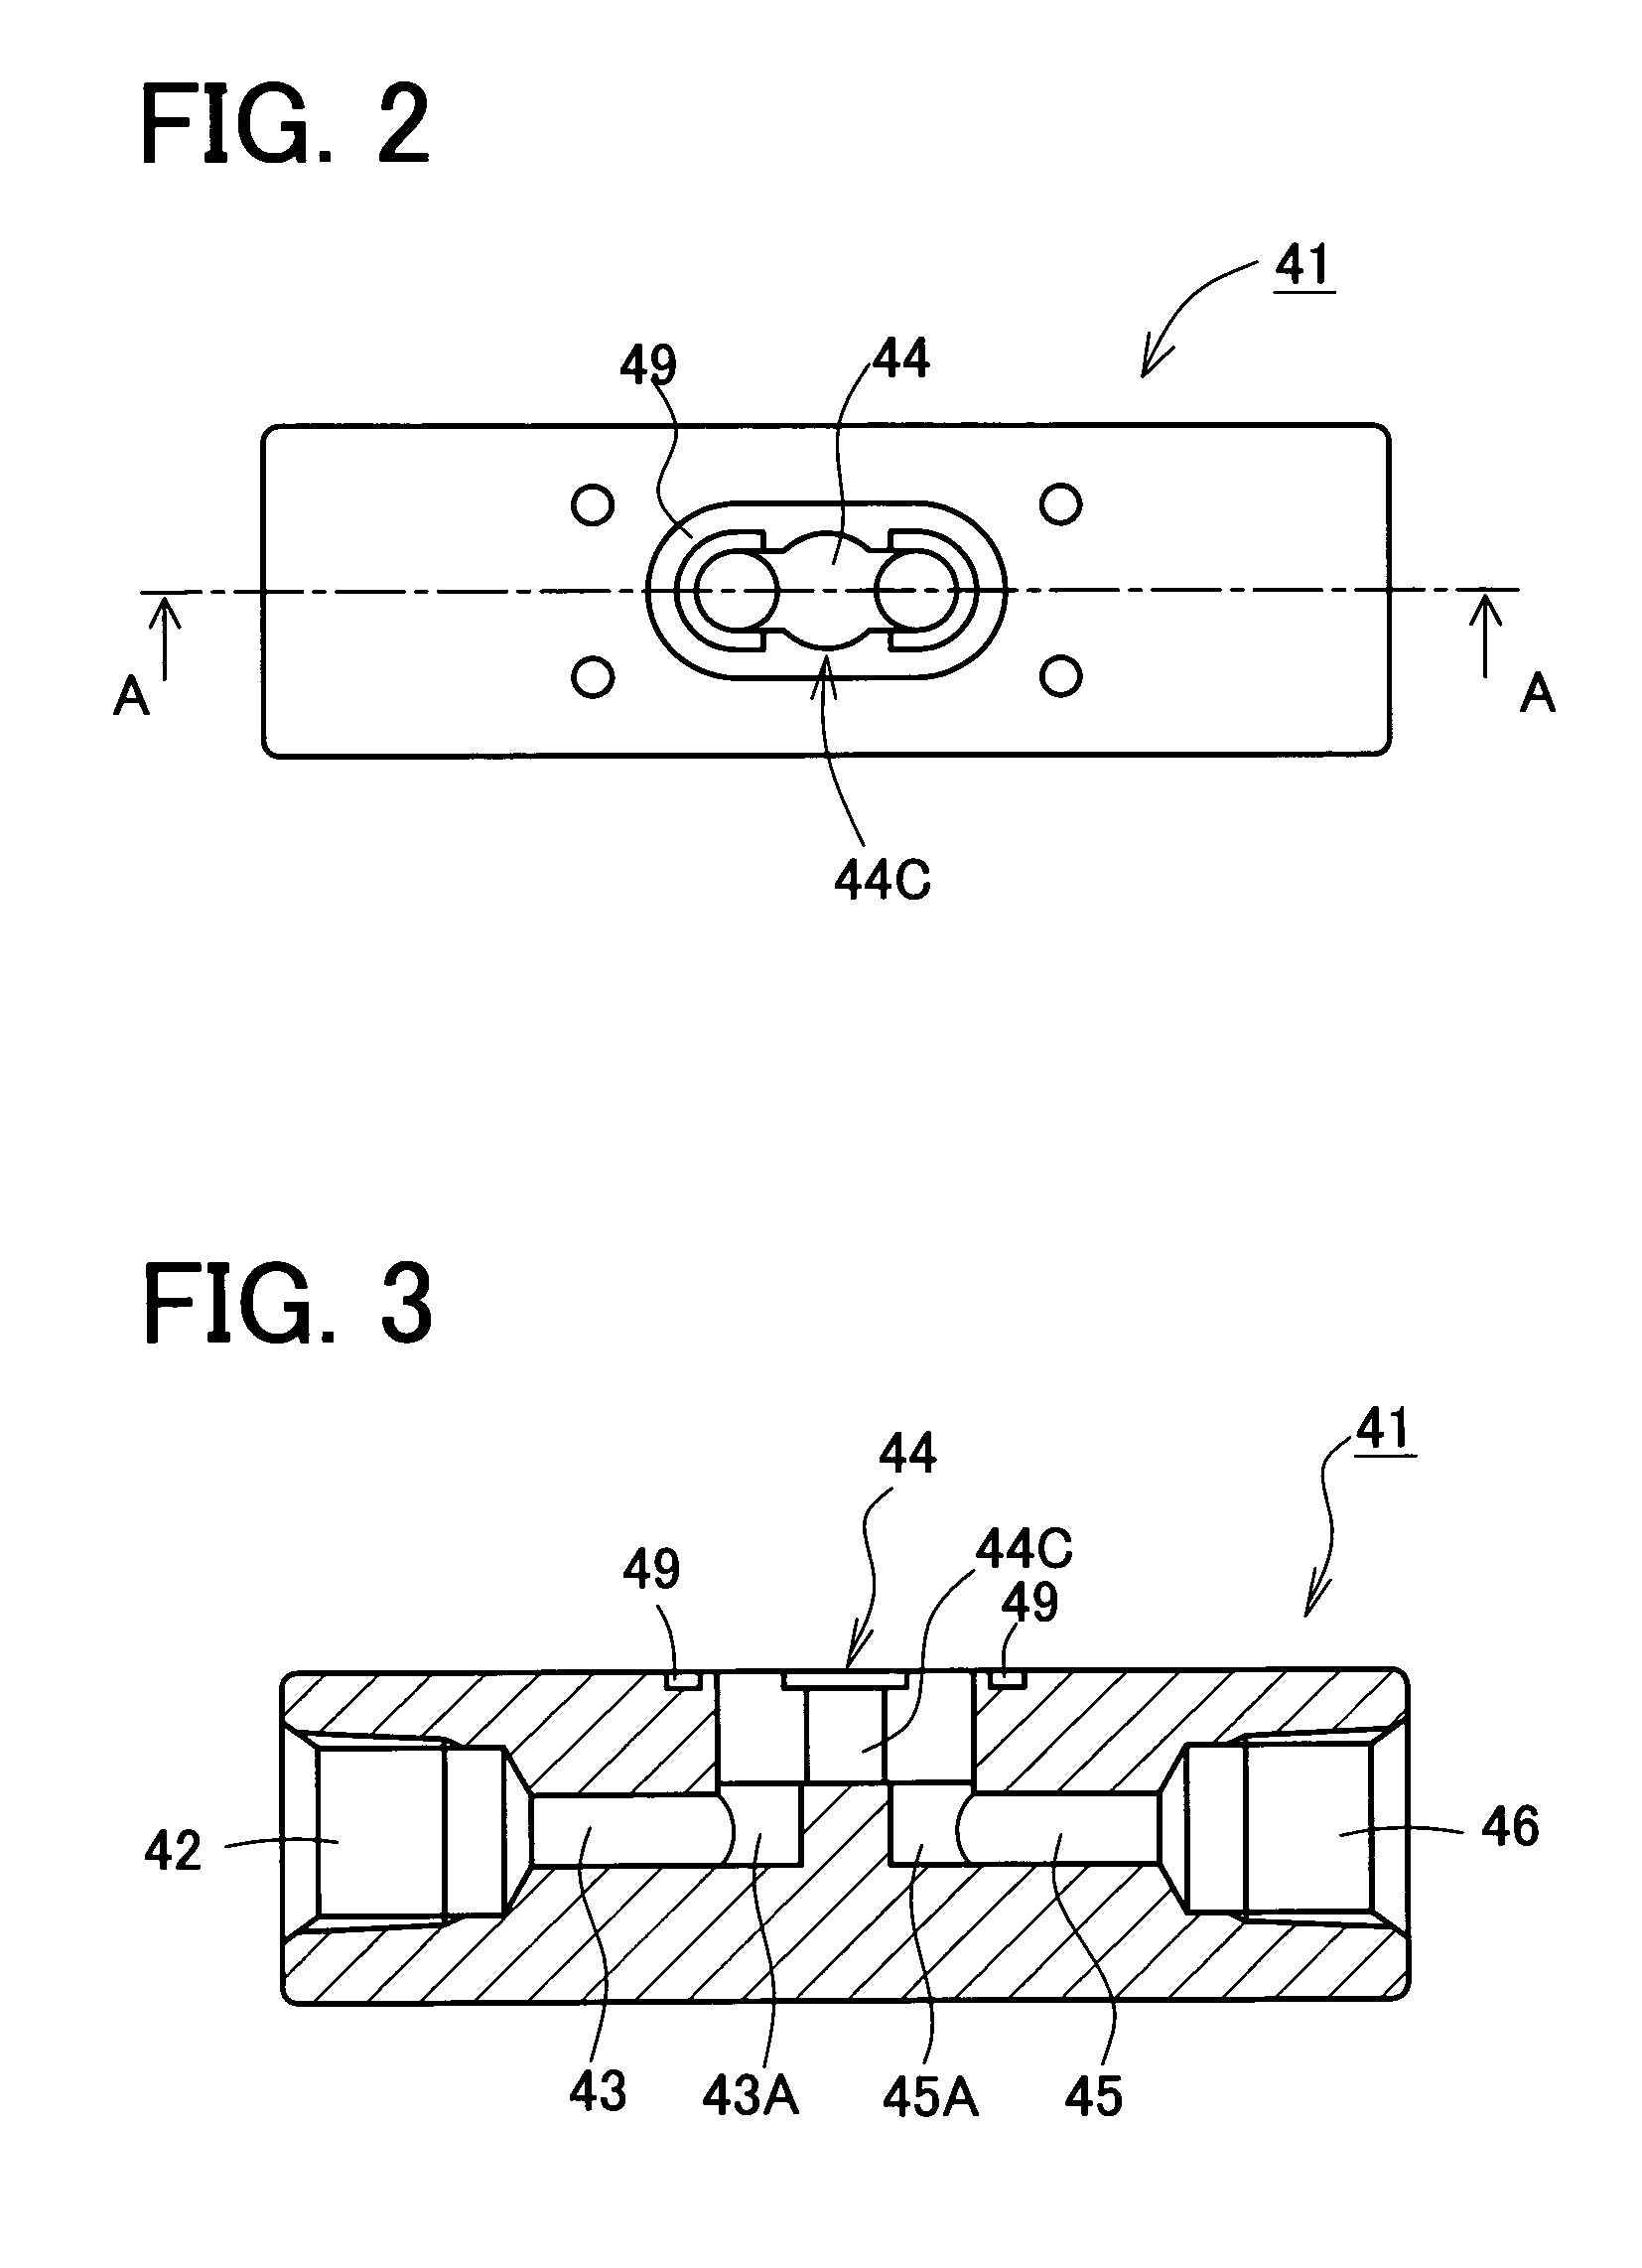 Thermal flowmeter having a laminate structure